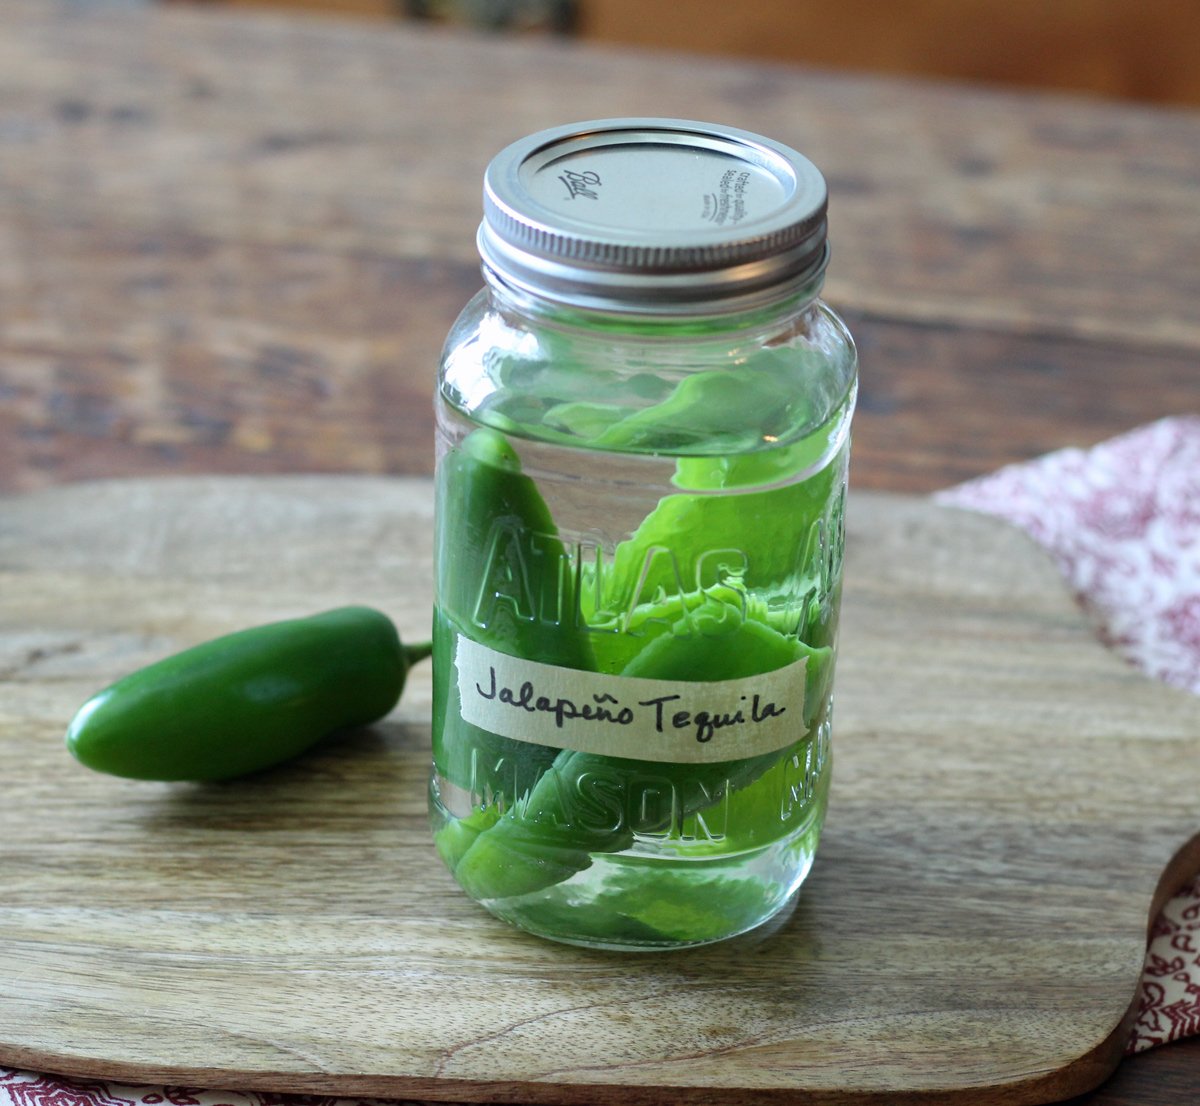 How to Make Jalapeno Tequila